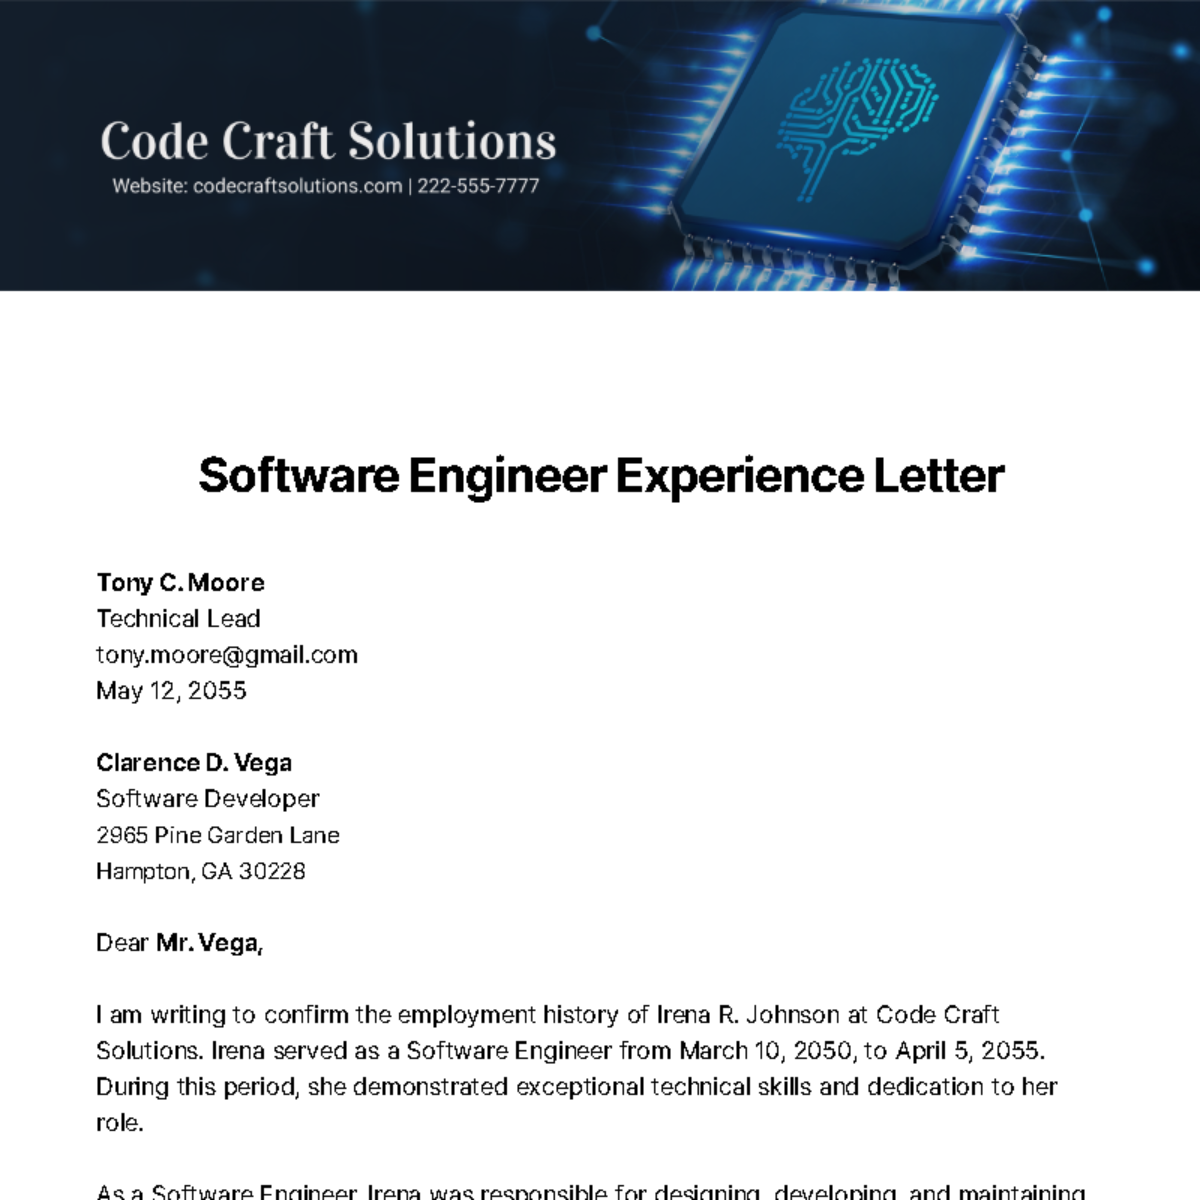 Software Engineer Experience Letter   Template